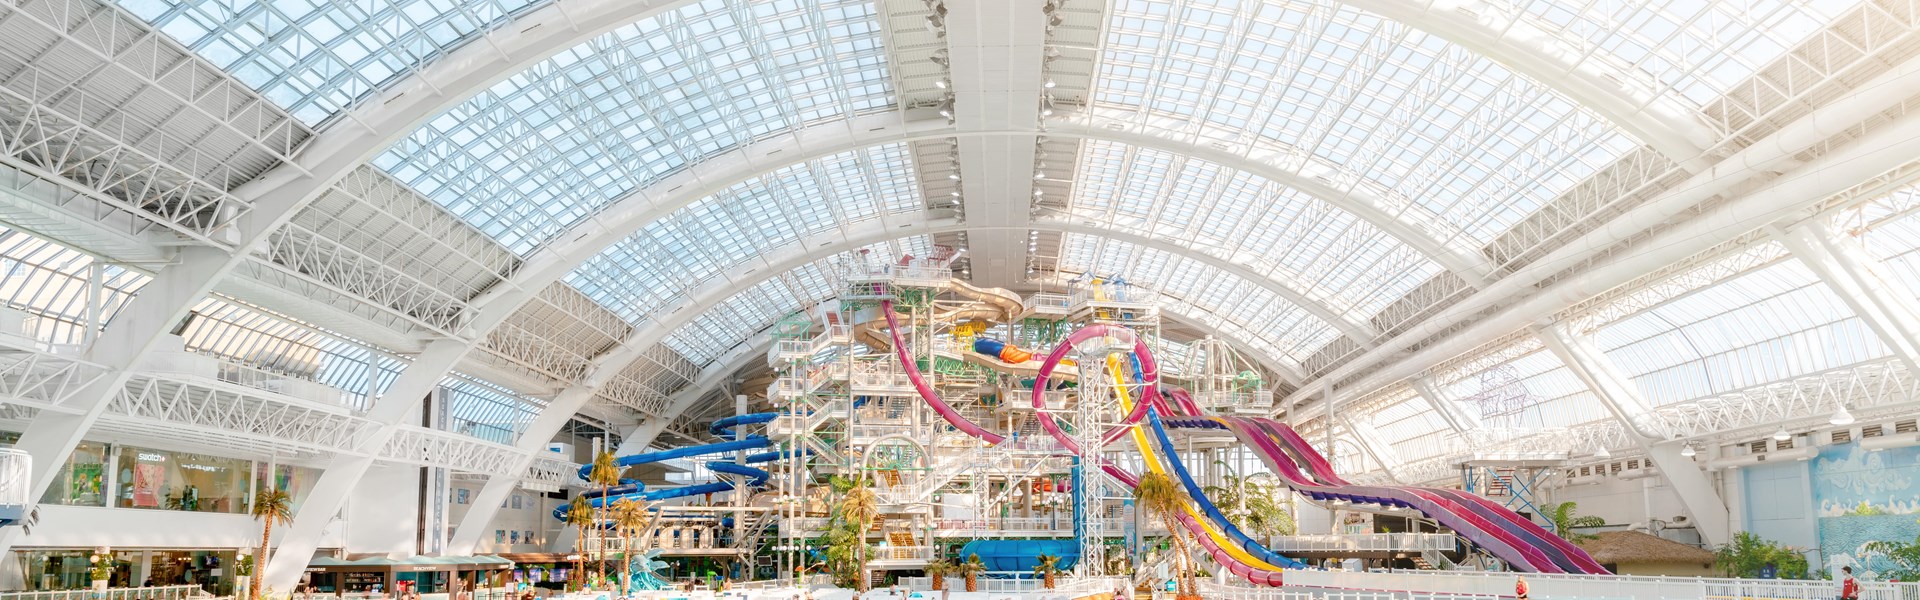 17 FUN Things to do in West Edmonton Mall (other than shopping!)